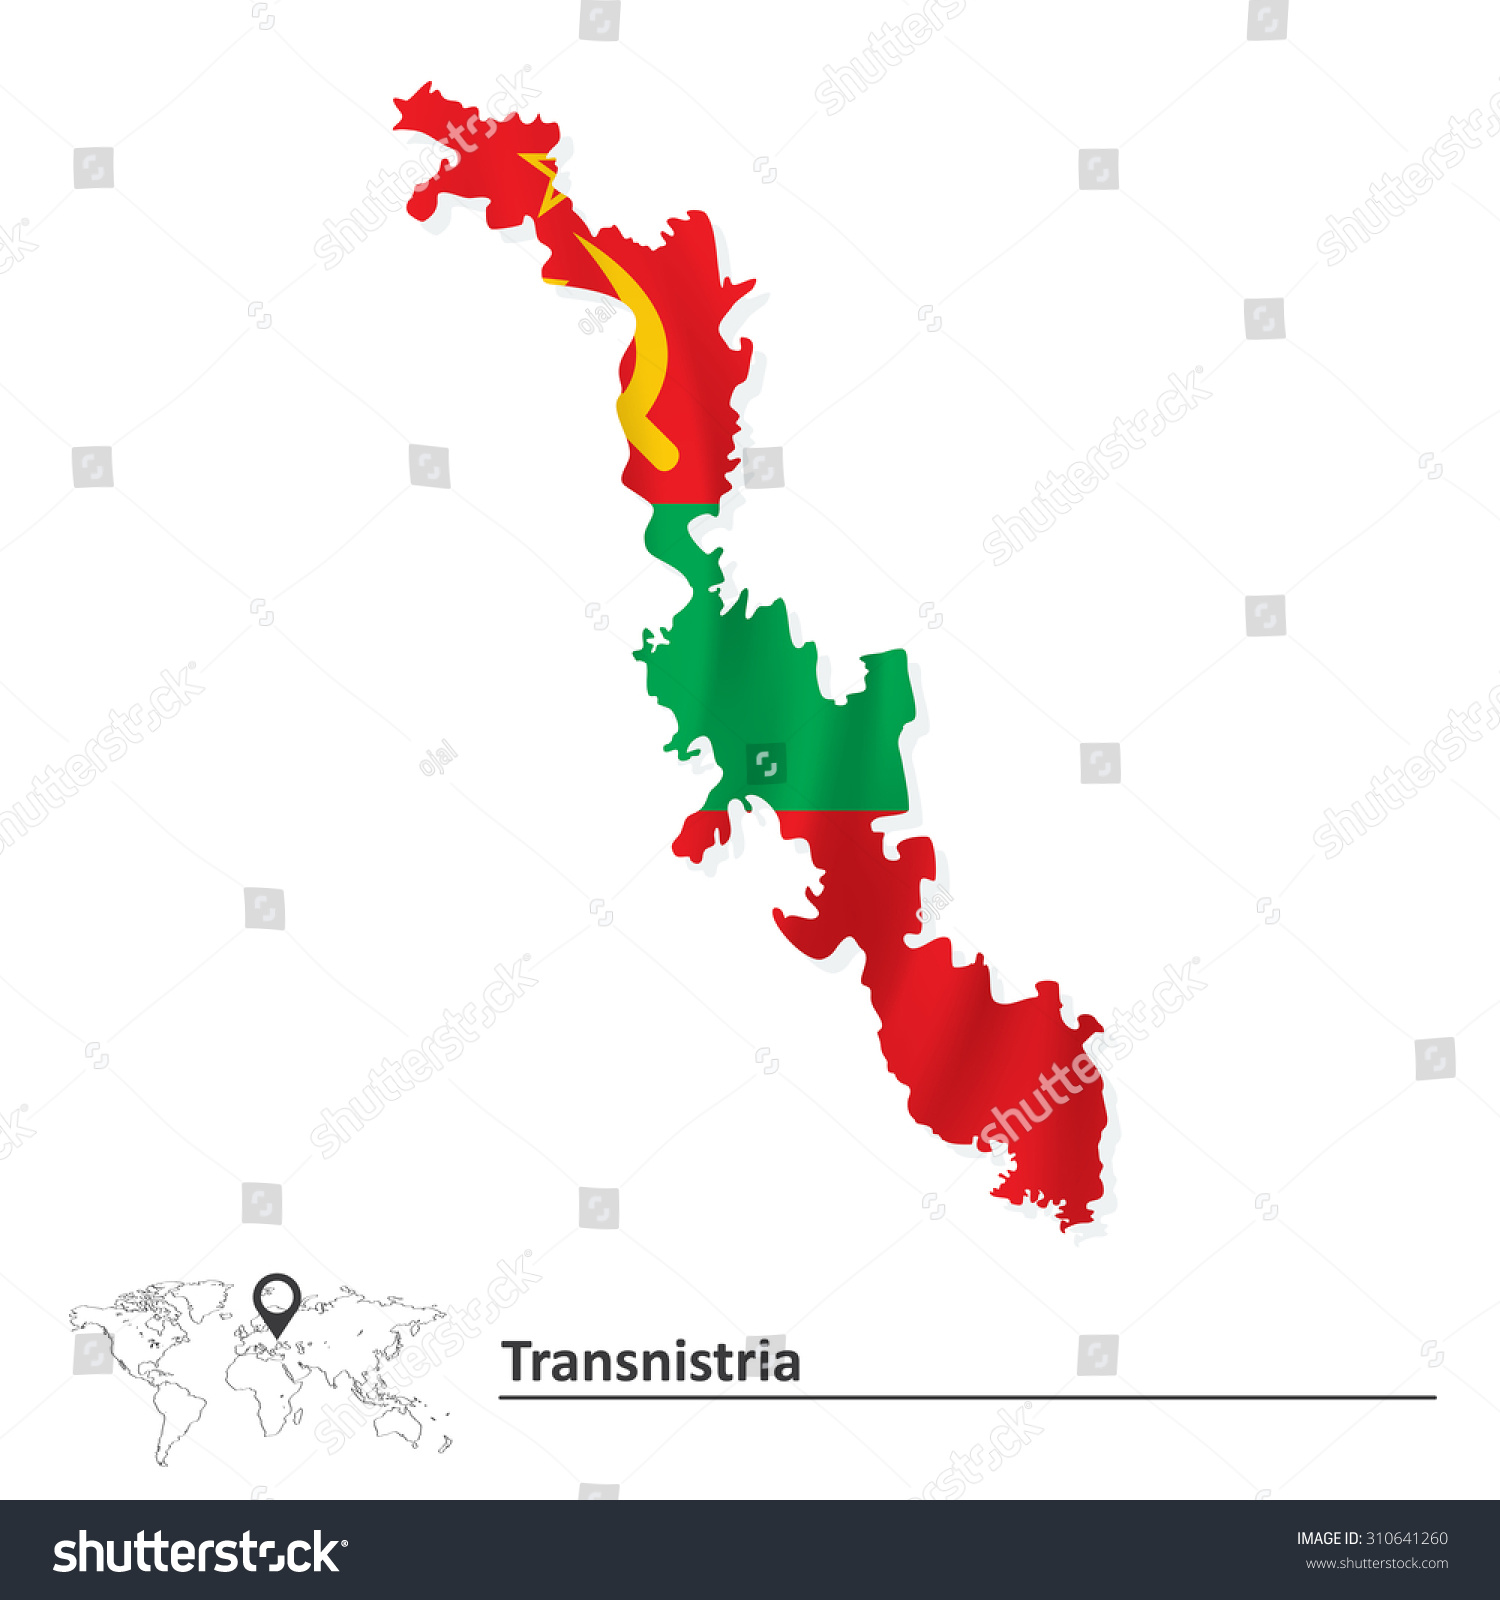 Map of Transnistria with flag - vector illustration #310641260